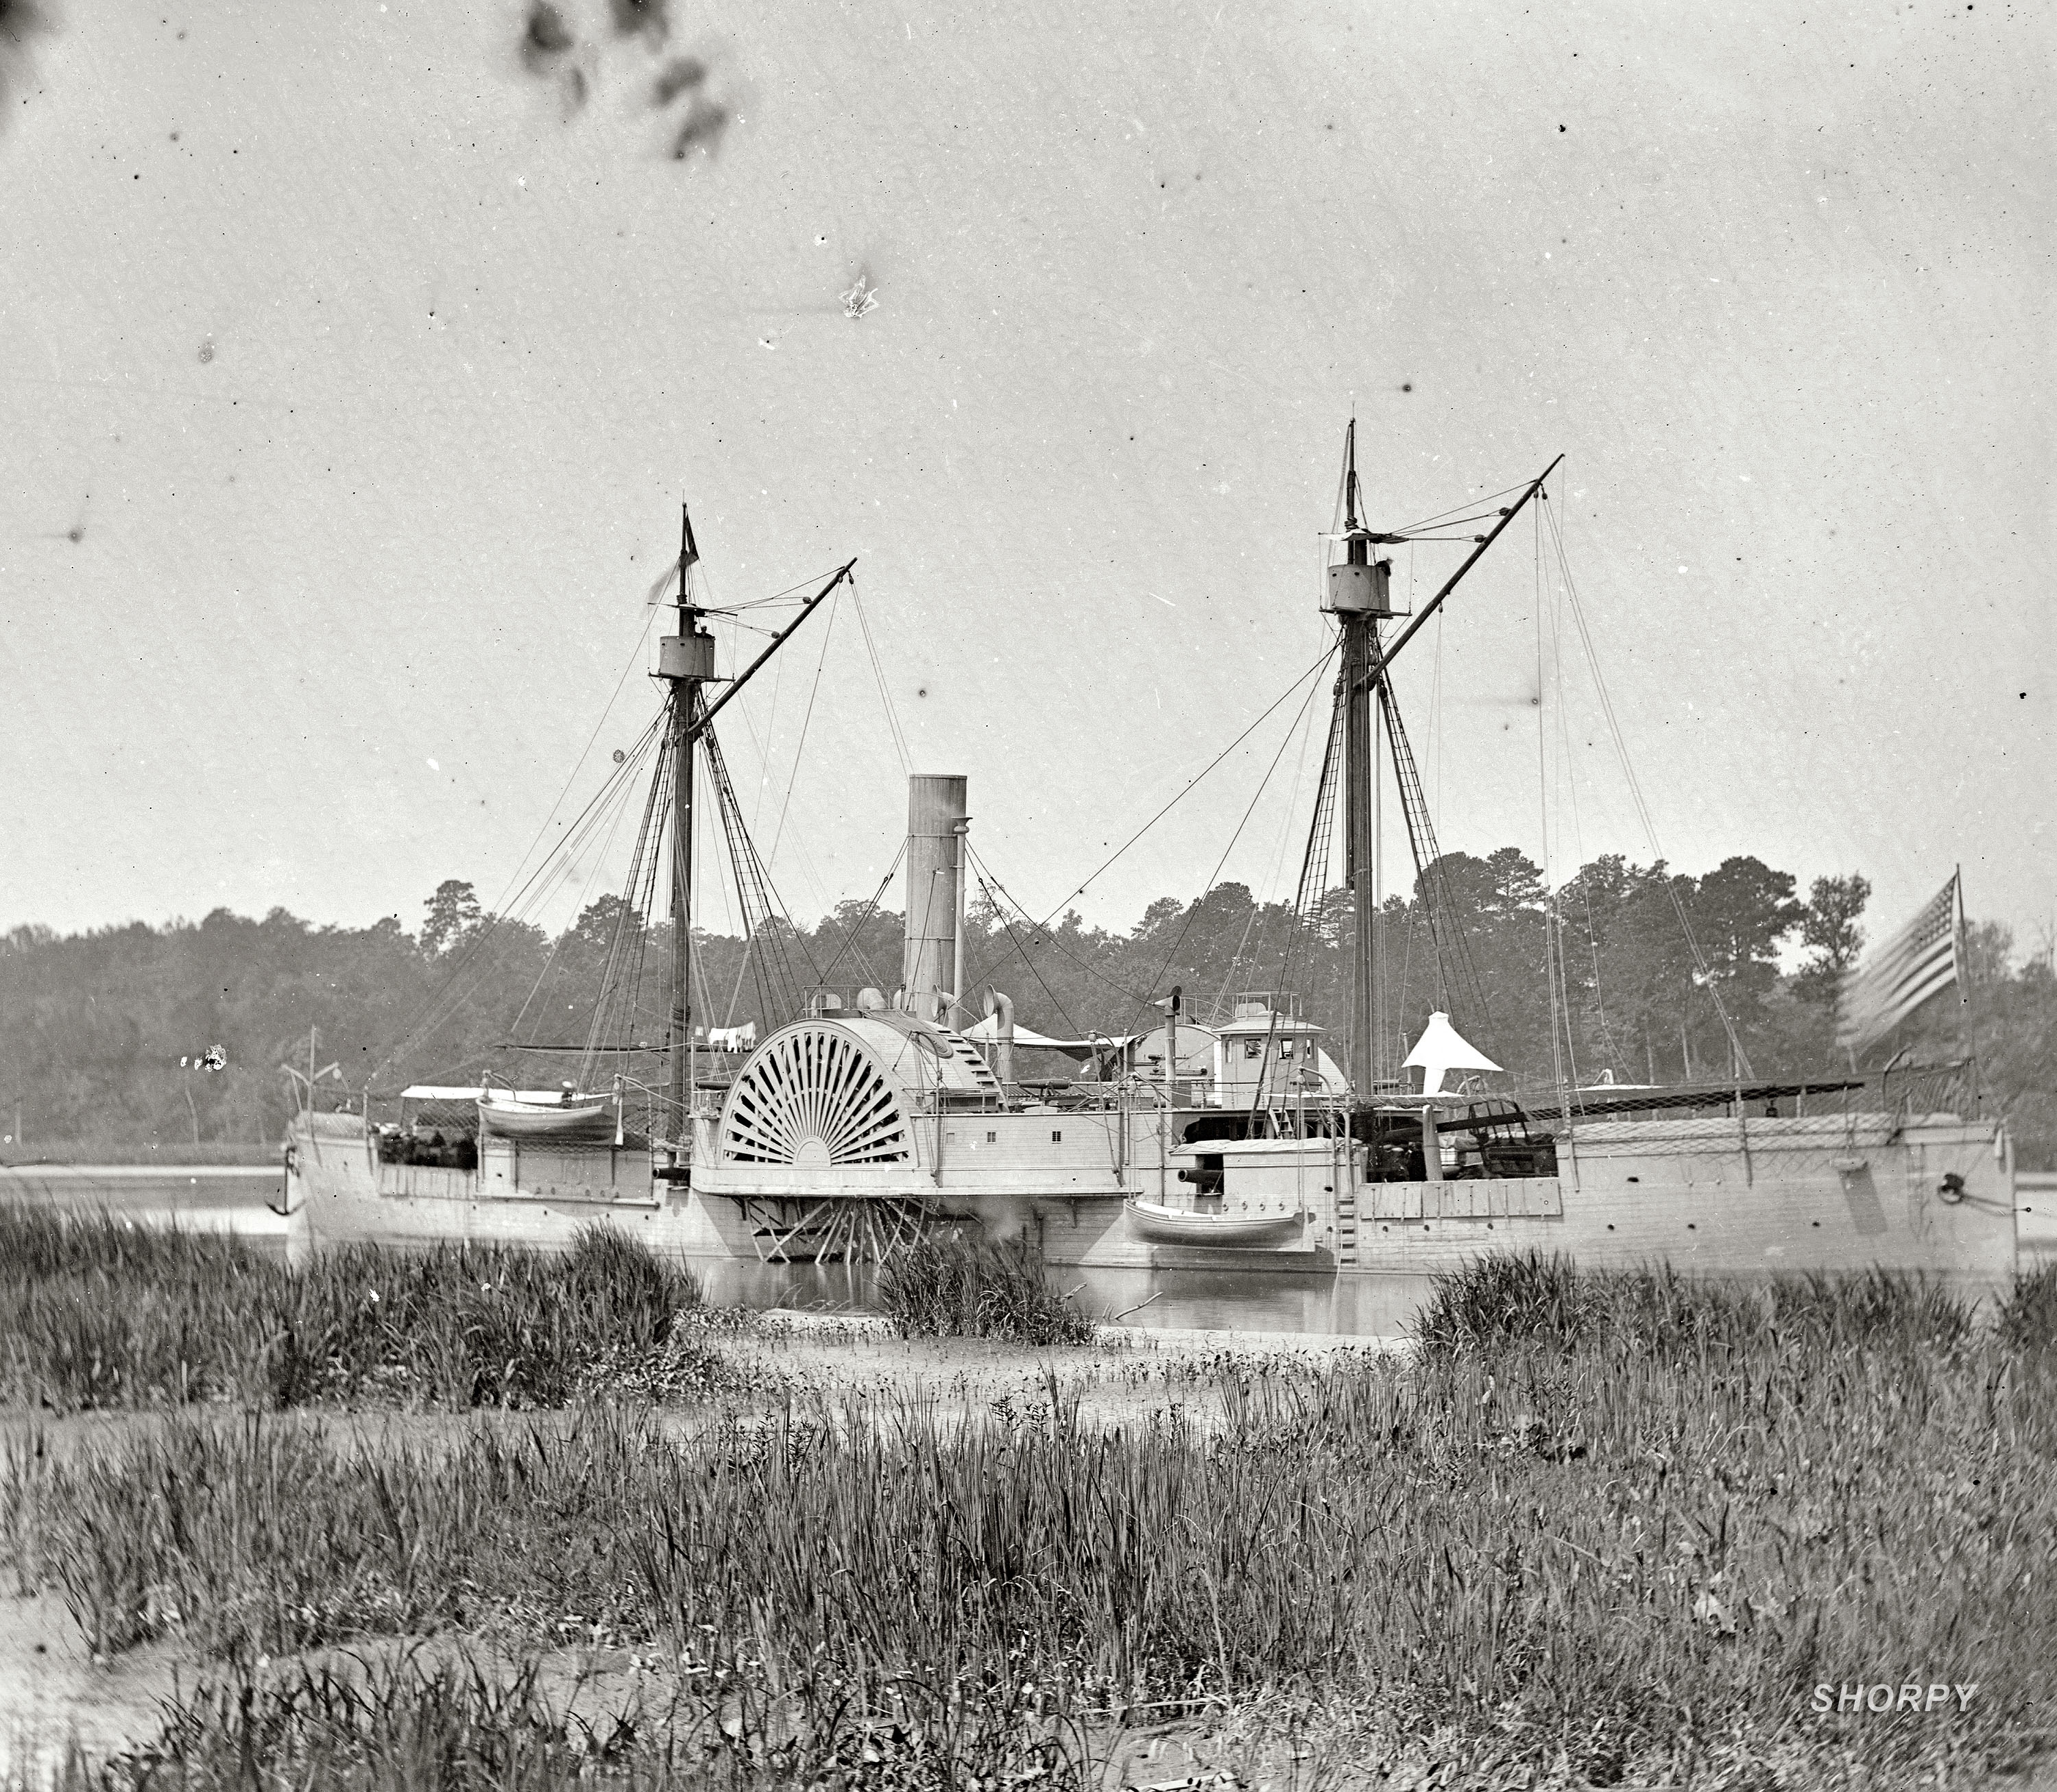 1864 or 1865. "Deep Bottom, Virginia. Federal gunboat Mendota on the James River. Put in service May 2, 1864." From photographs of the Federal Navy and seaborne expeditions against the Atlantic Coast of the Confederacy. Wet plate glass negative, photographer unknown. View full size.